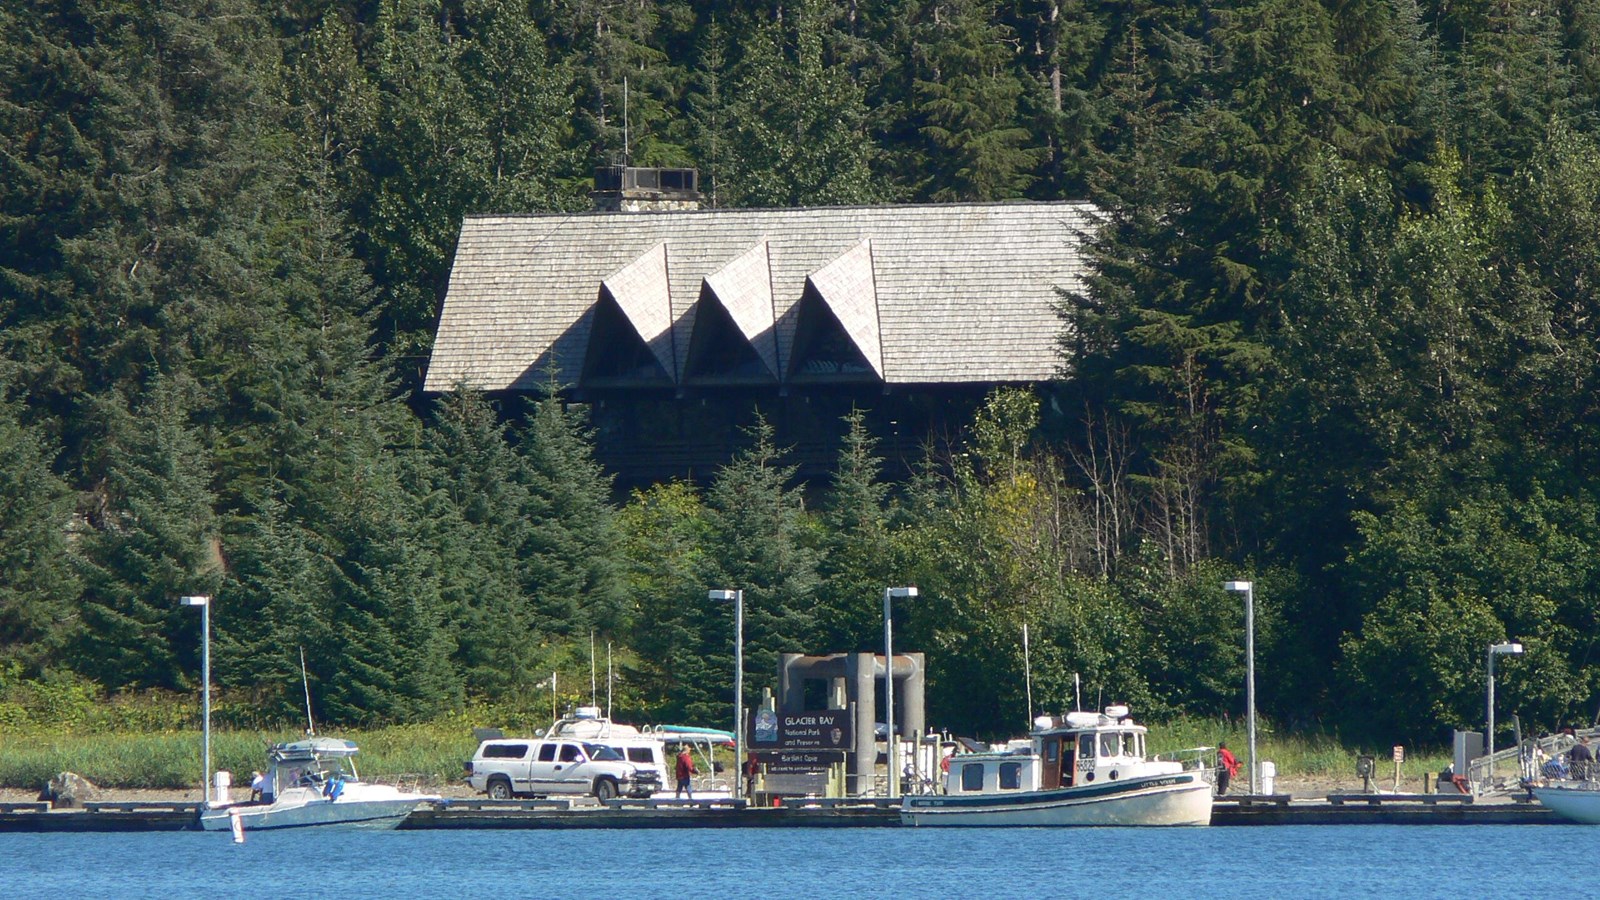 The glacier Bay lodge peeks above spruce trees in Bartlett Cove. Dock and boats in foreground